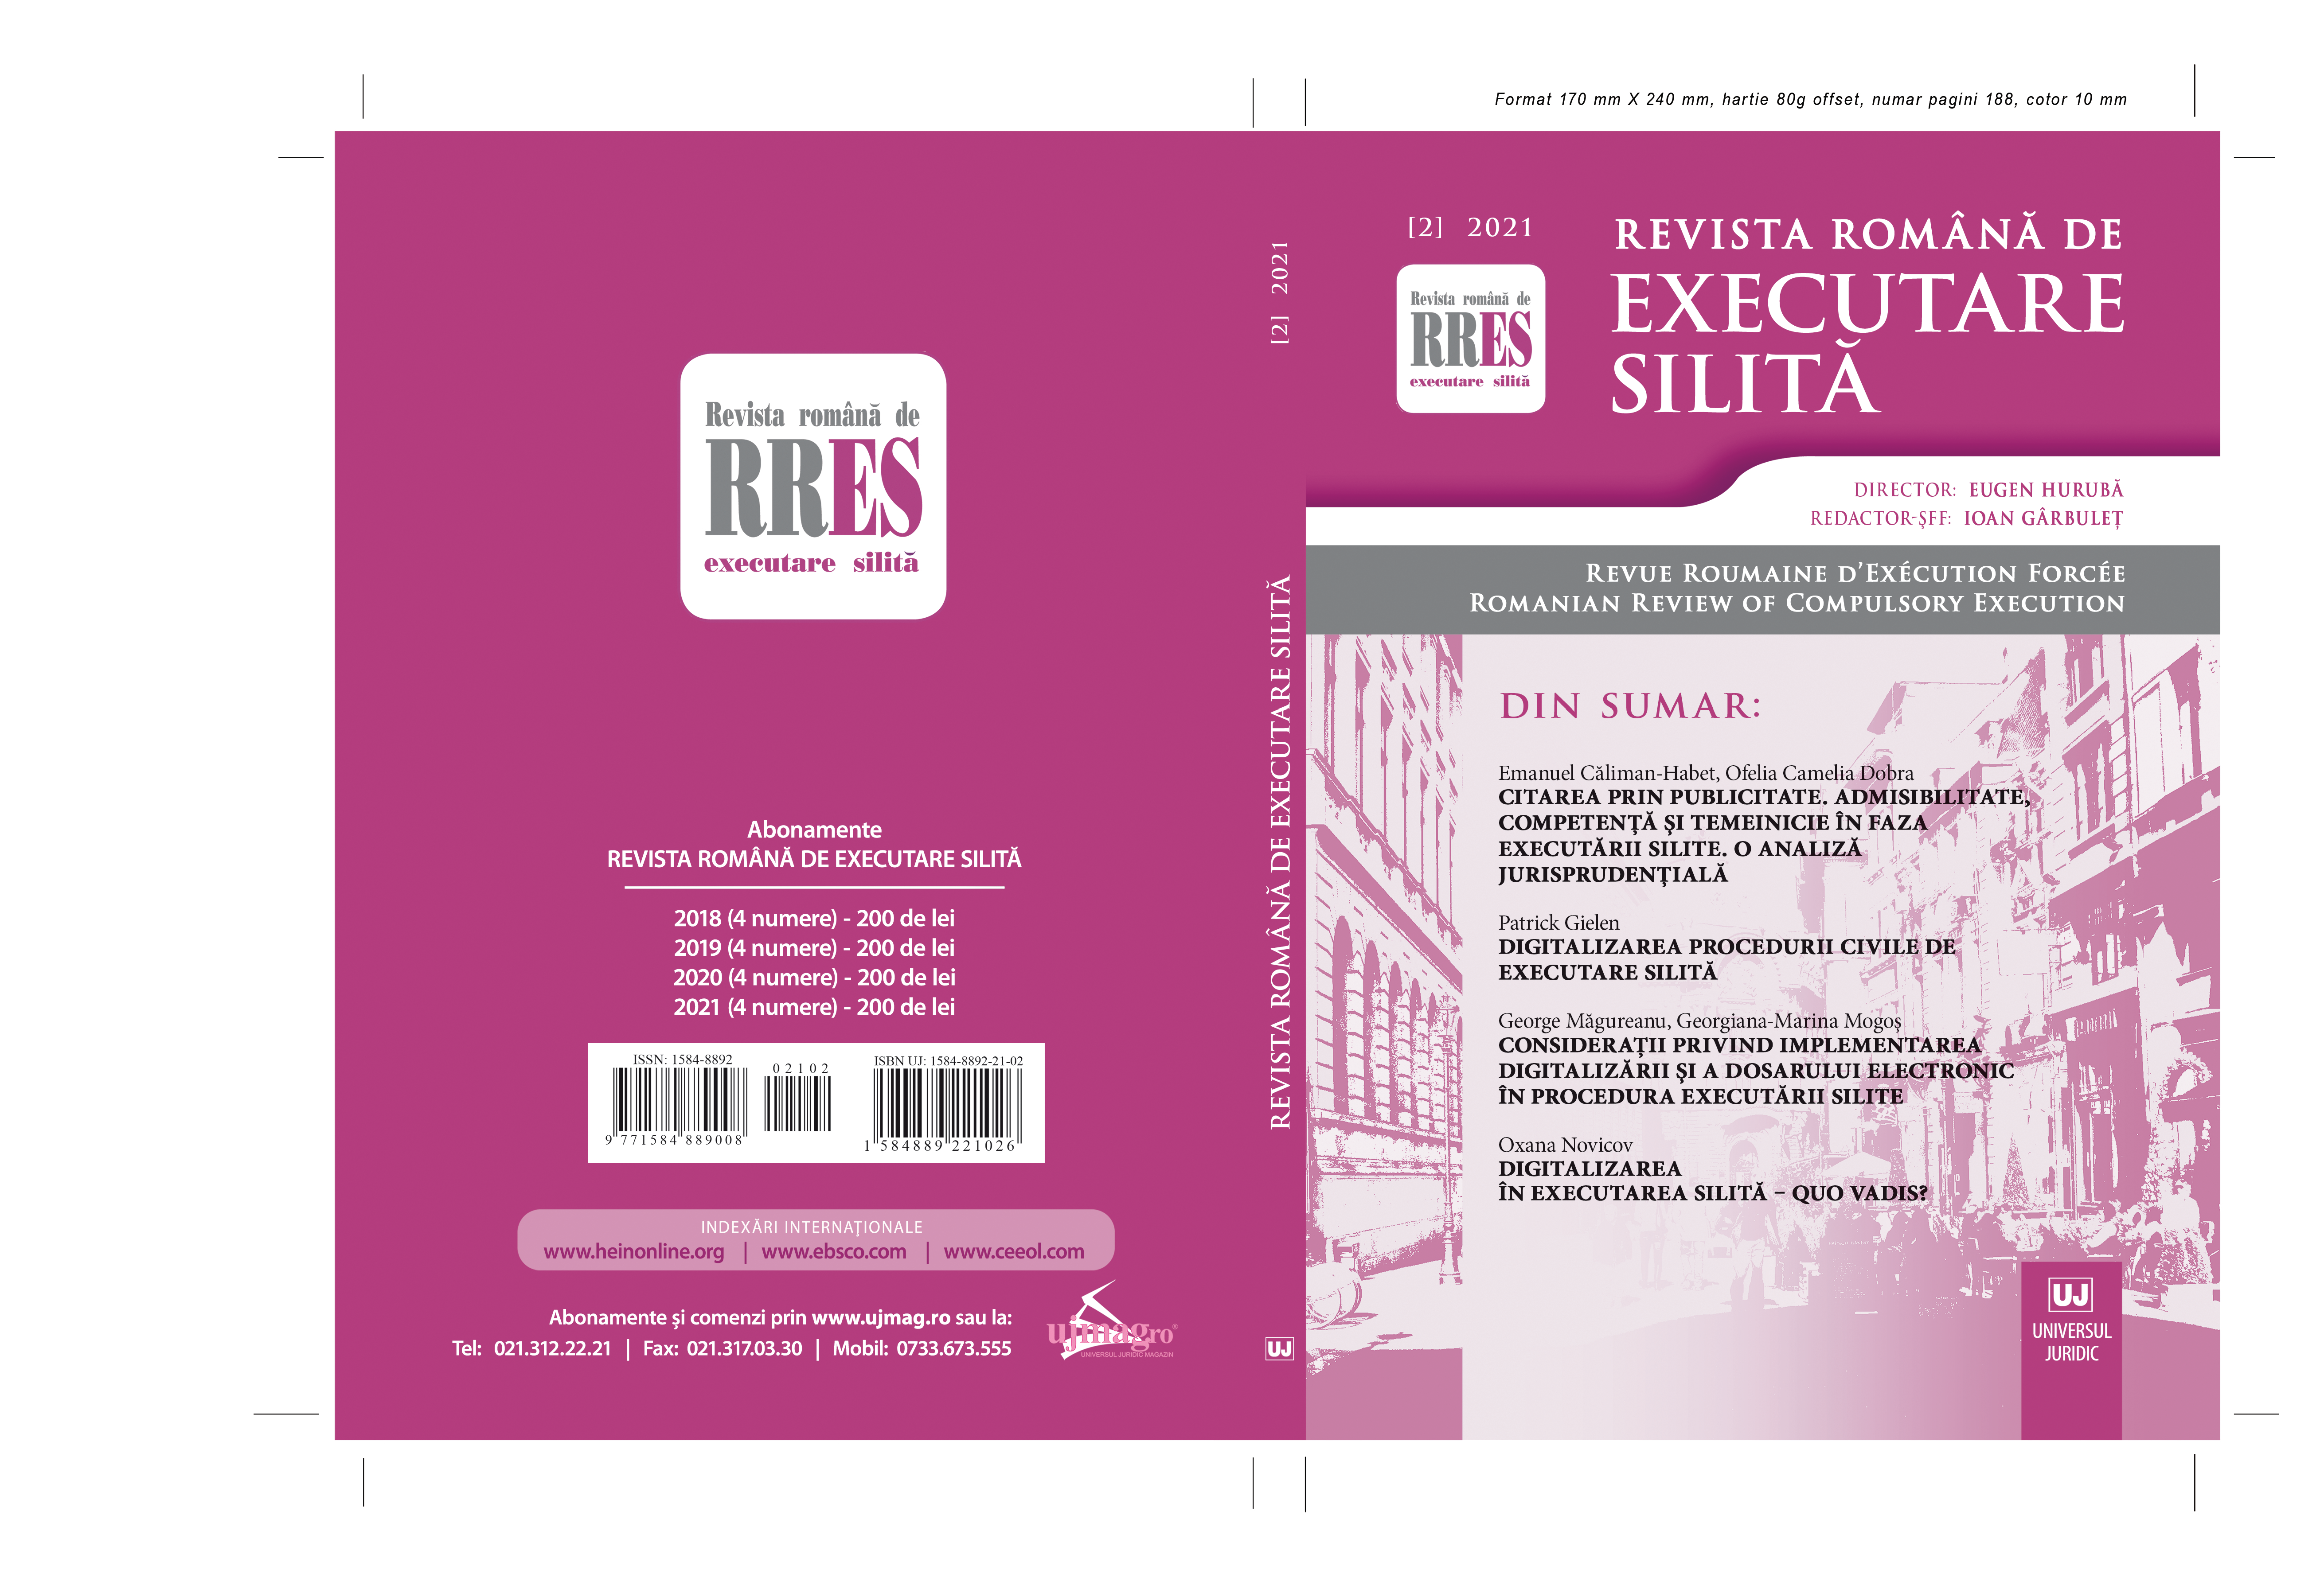 Considerations on the implementation of the digitalization and the electronic file in the forced execution procedure Cover Image